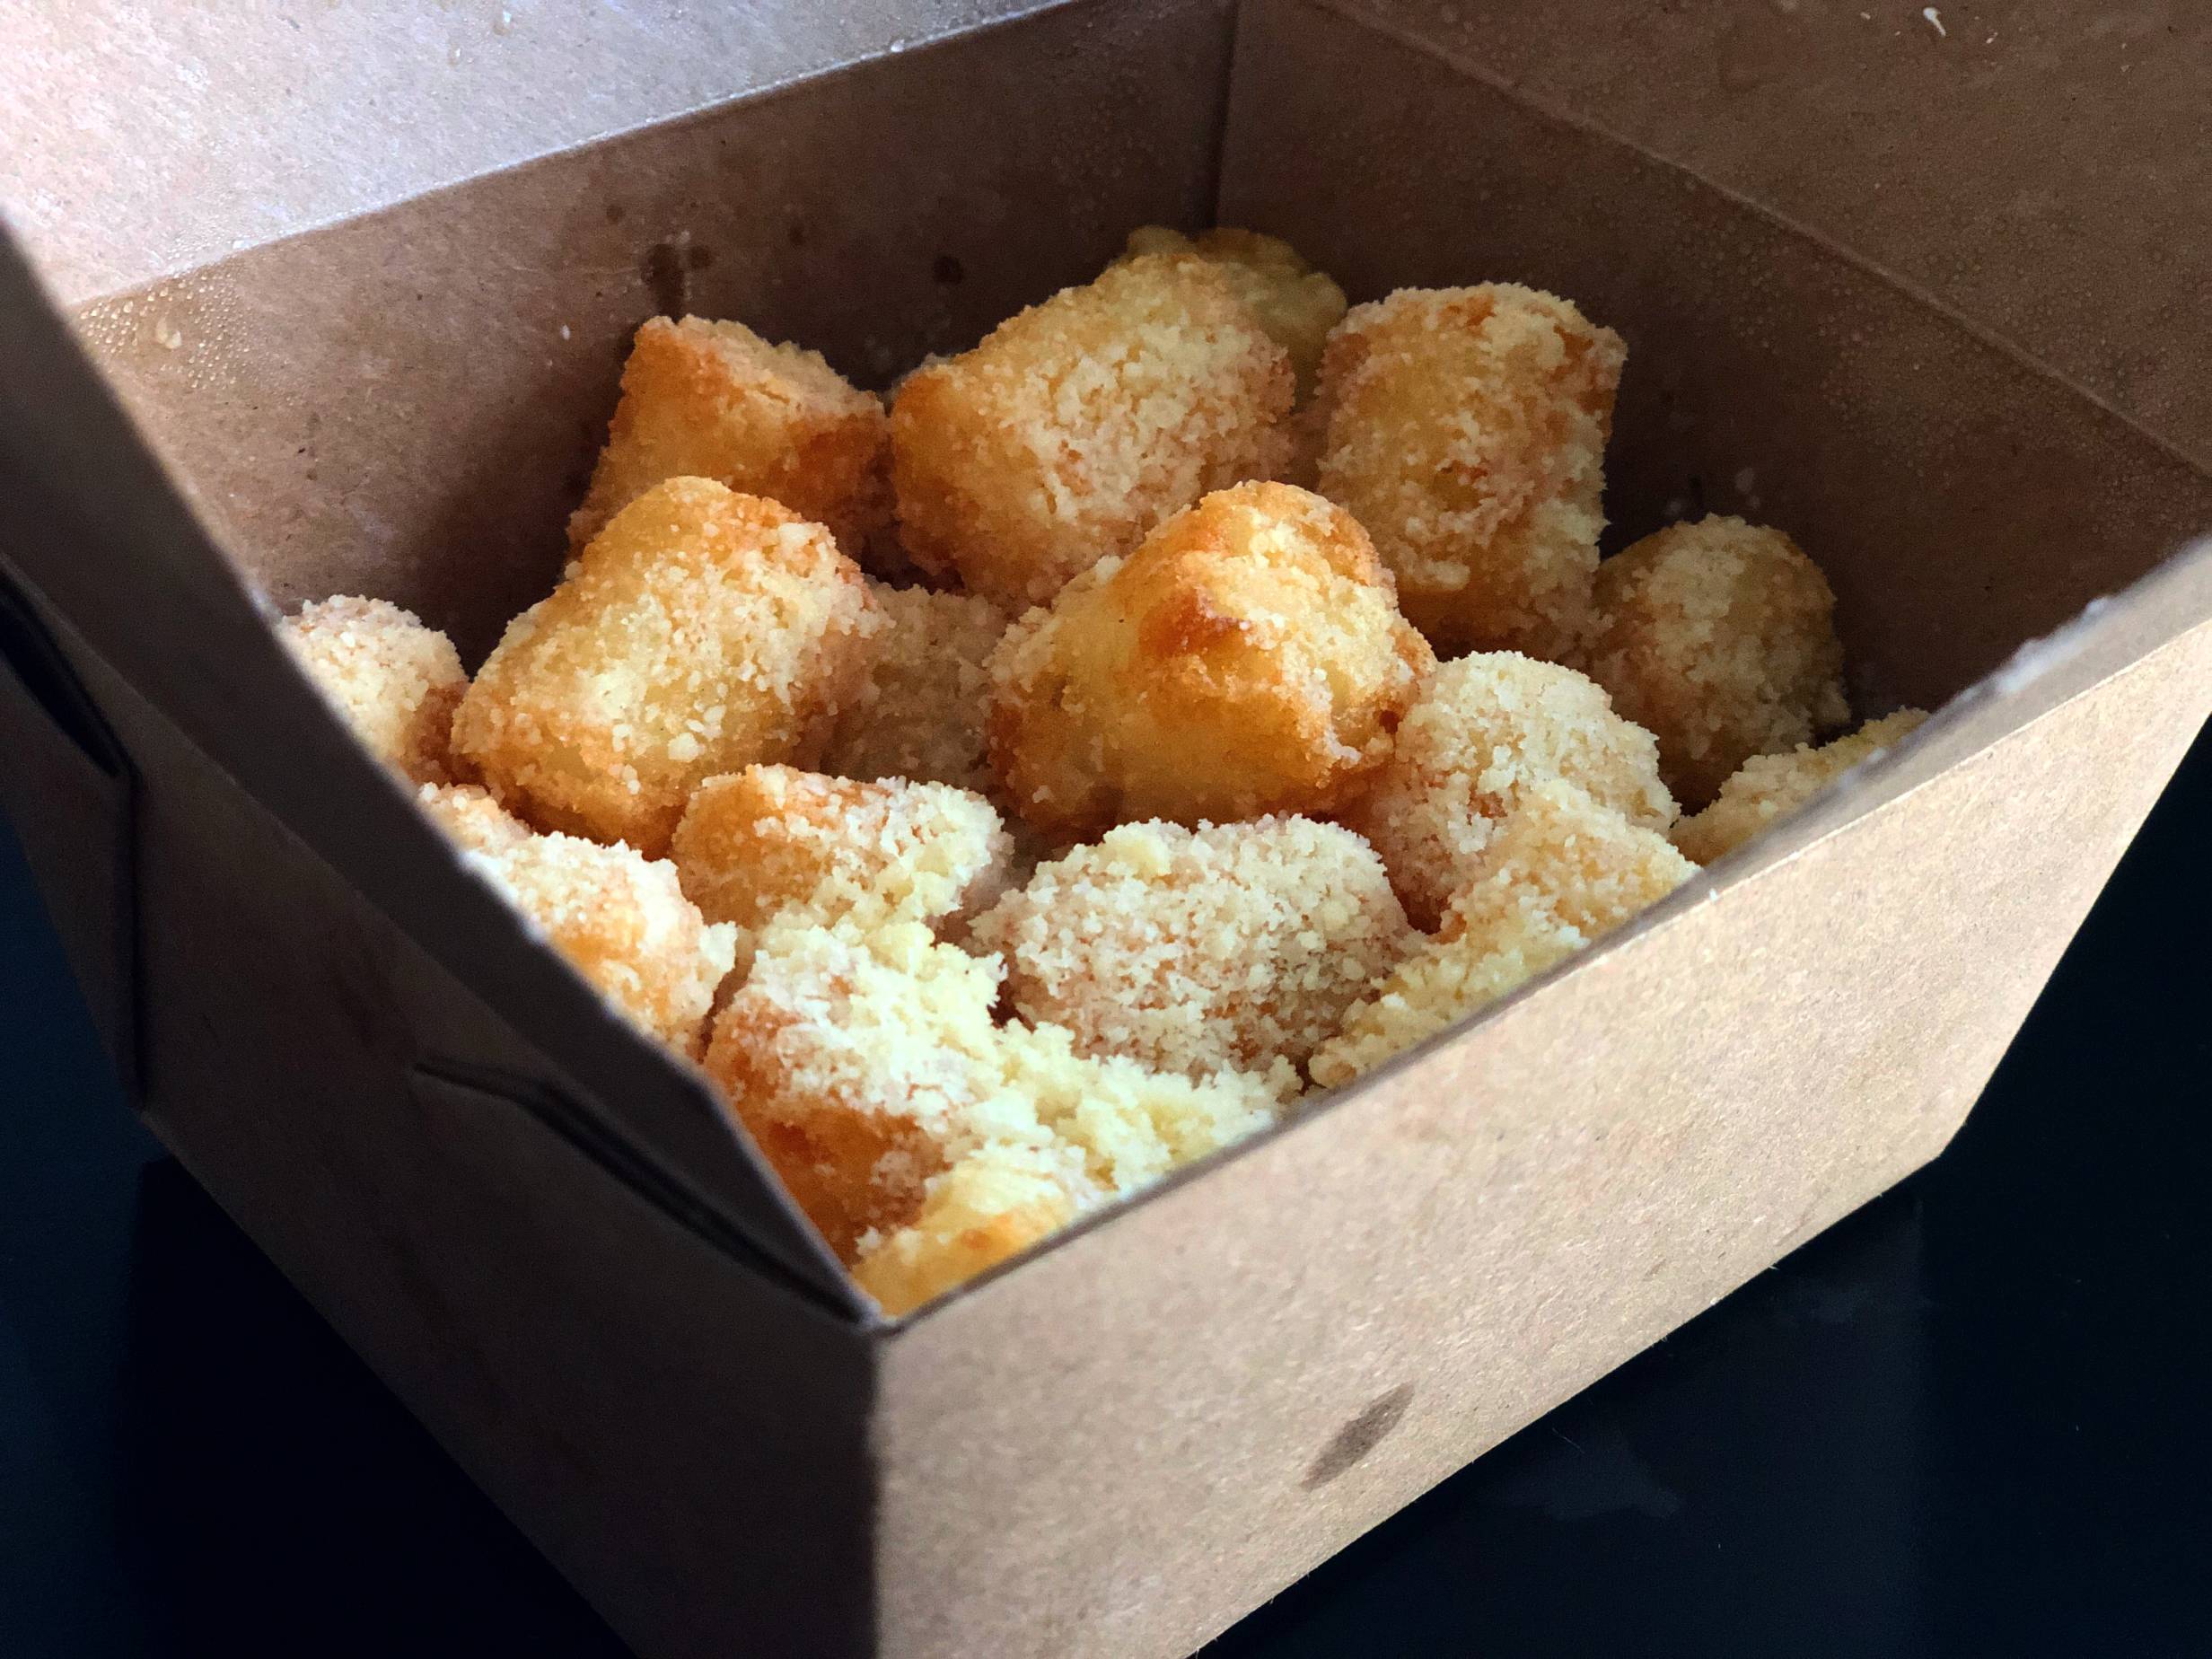 A small cardbox box is open revealing many fried tater tots covered in parmesan cheese. Photo by Alyssa Buckley.